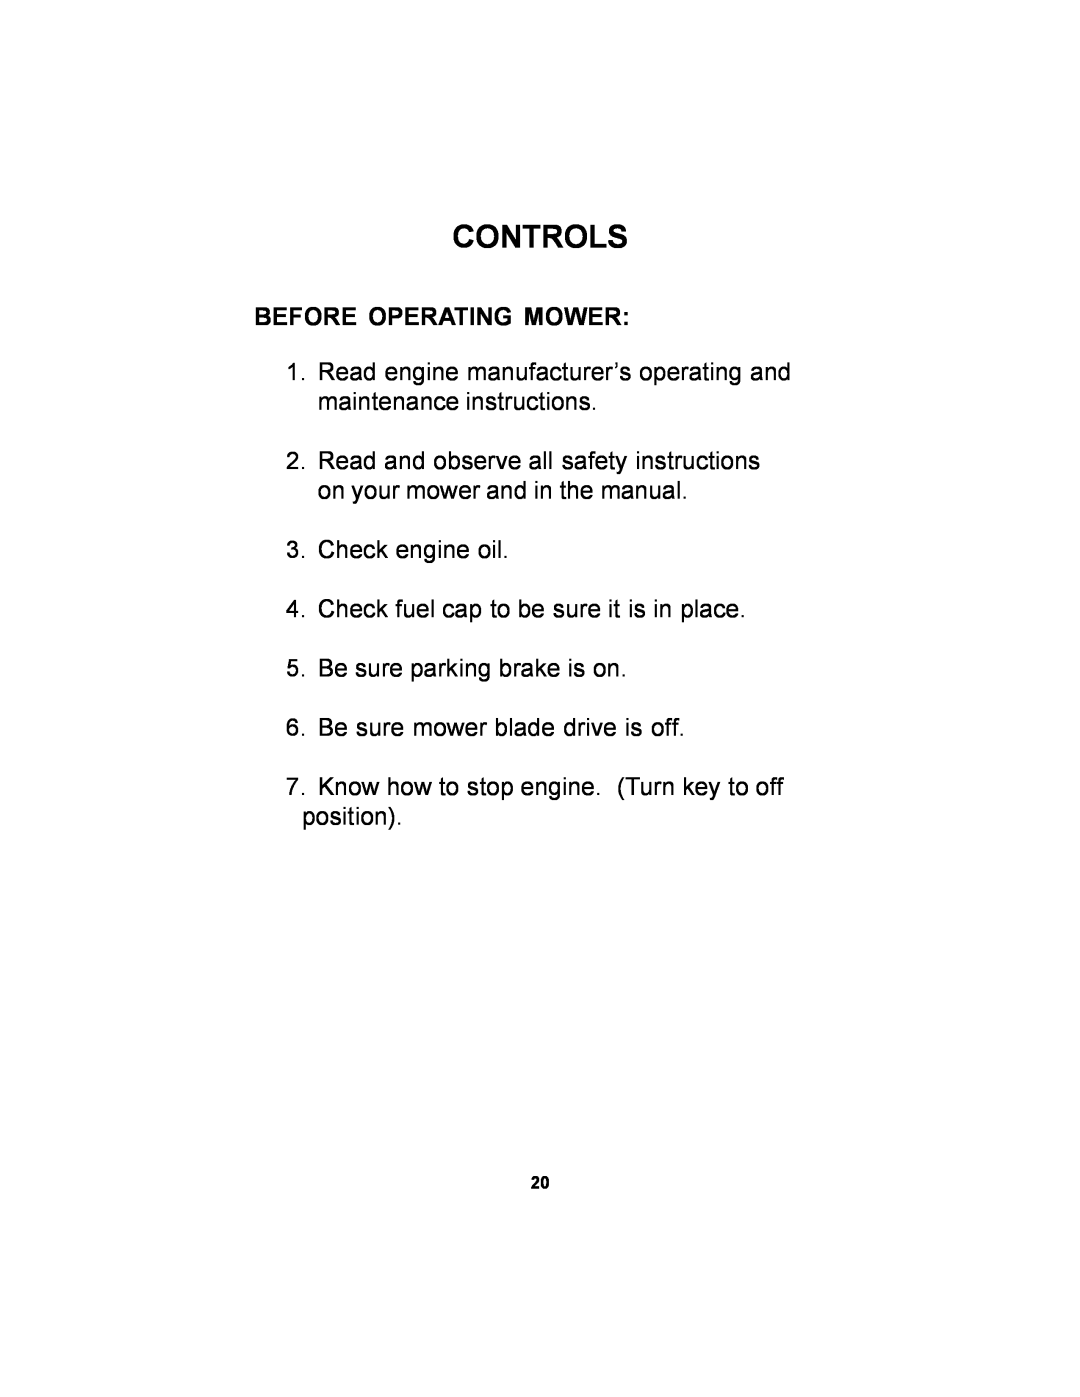 Dixon 14295-1005 manual Before Operating Mower, Read engine manufacturer’s operating and maintenance instructions, Controls 